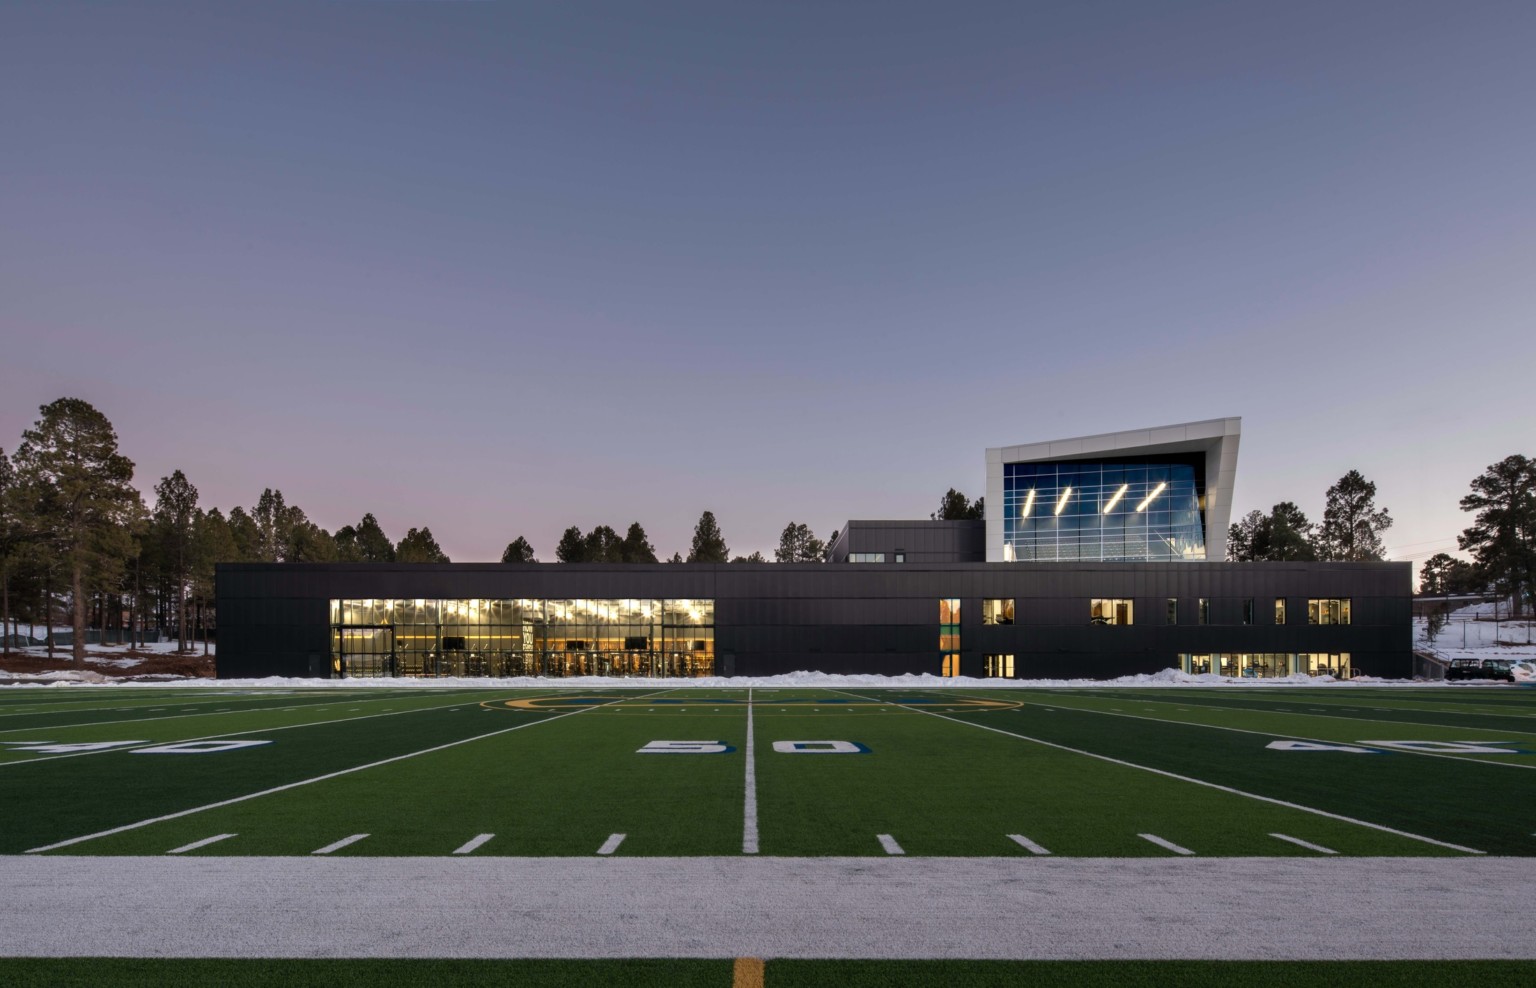 football field in front of a single story building with a multi story angular volume behind it against tree line sky at dusk